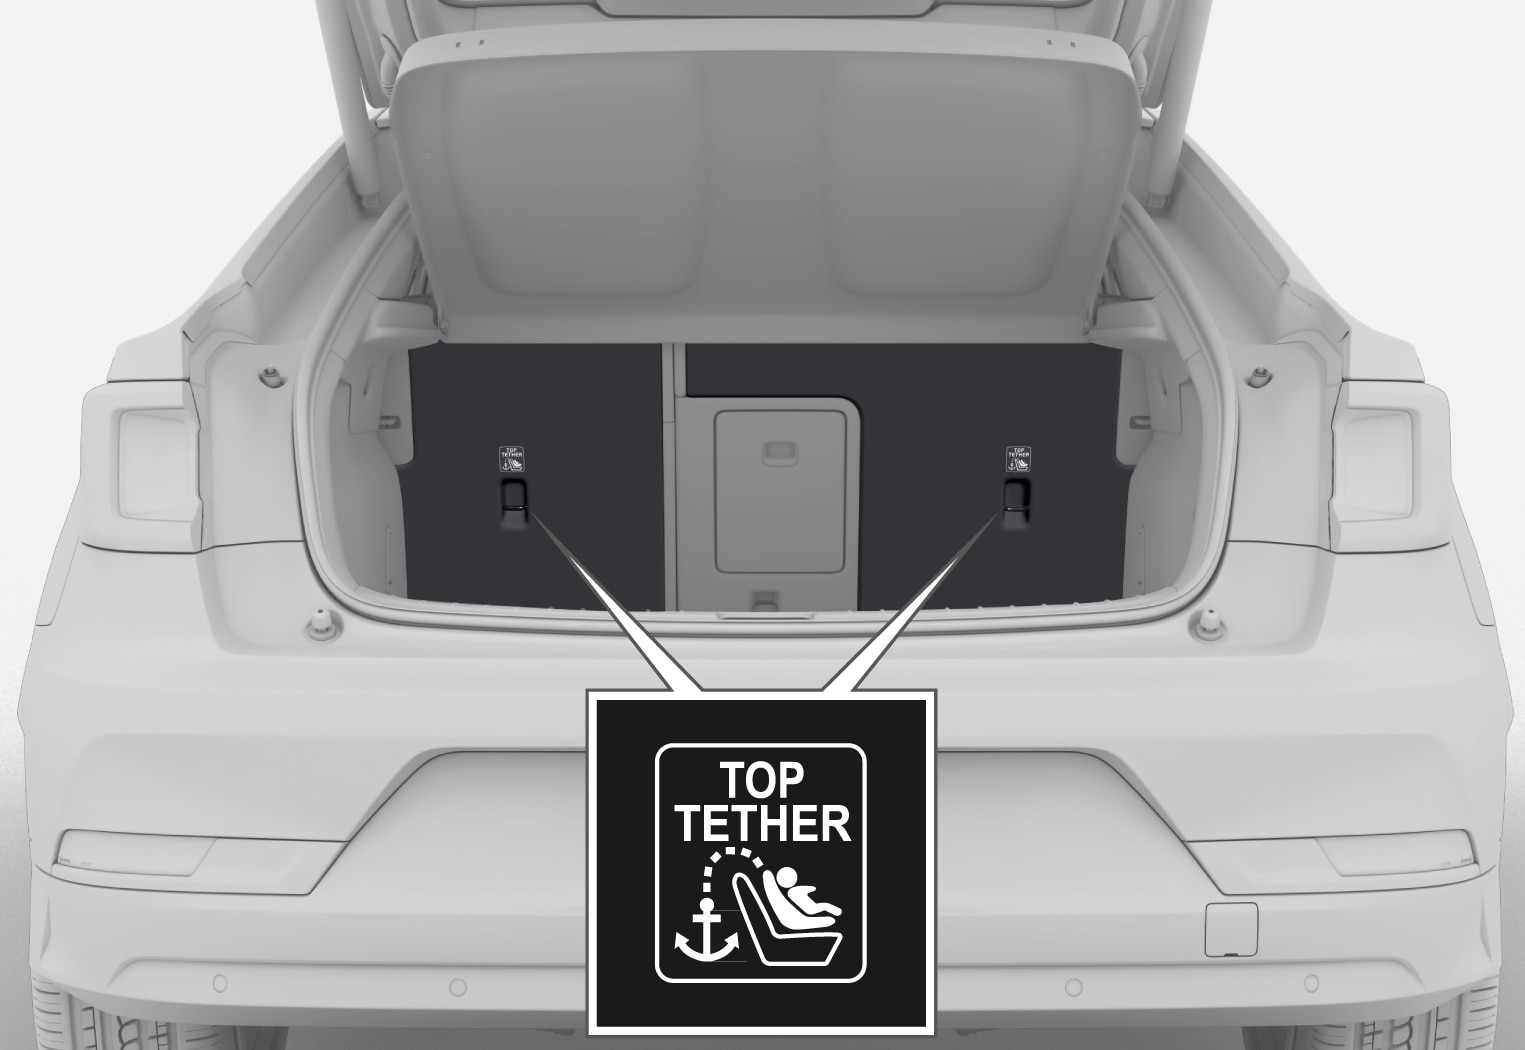 PS-2007-Safety–Top tether position rear